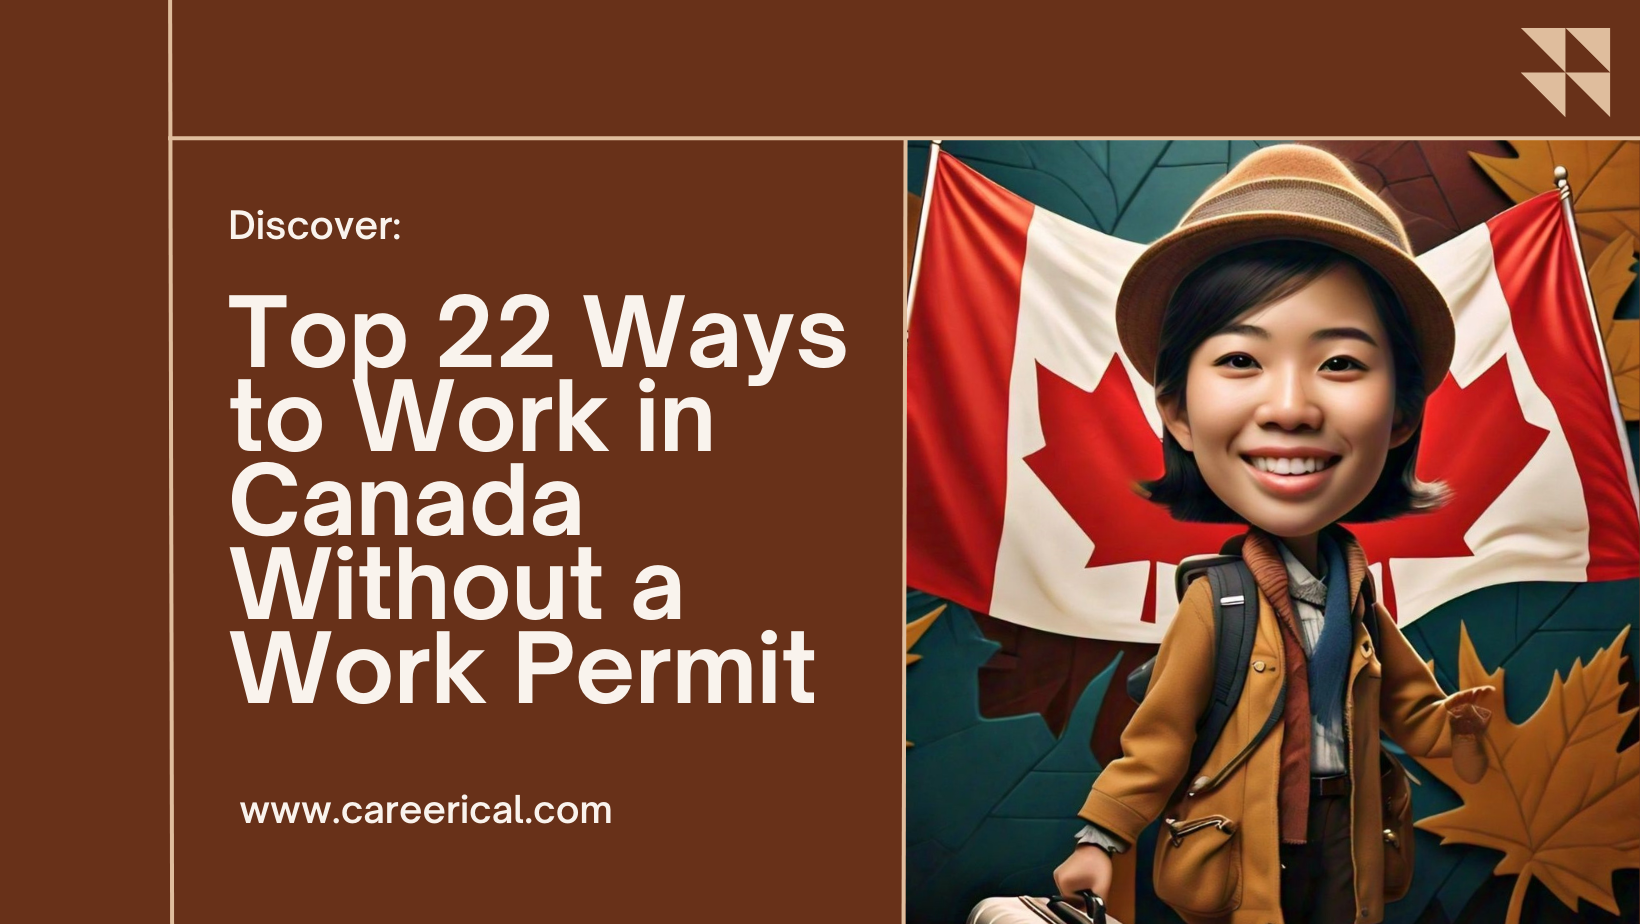 Top 22 Ways to Work in Canada Without a Work Permit